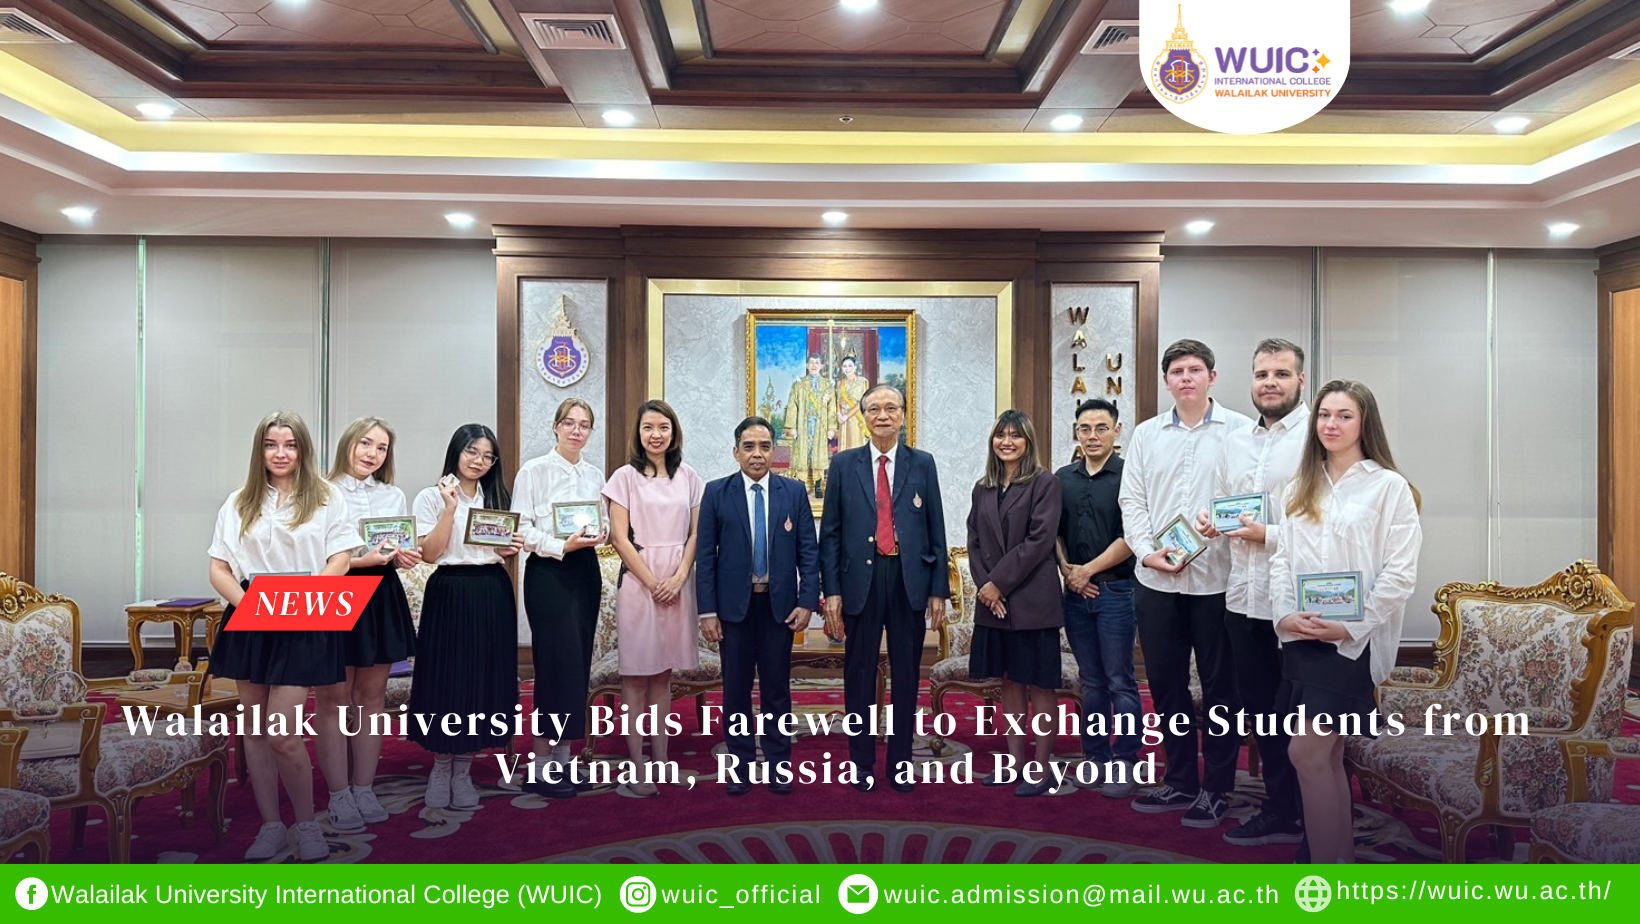 Walailak University Bids Farewell to Exchange Students from Vietnam, Russia, and Beyond